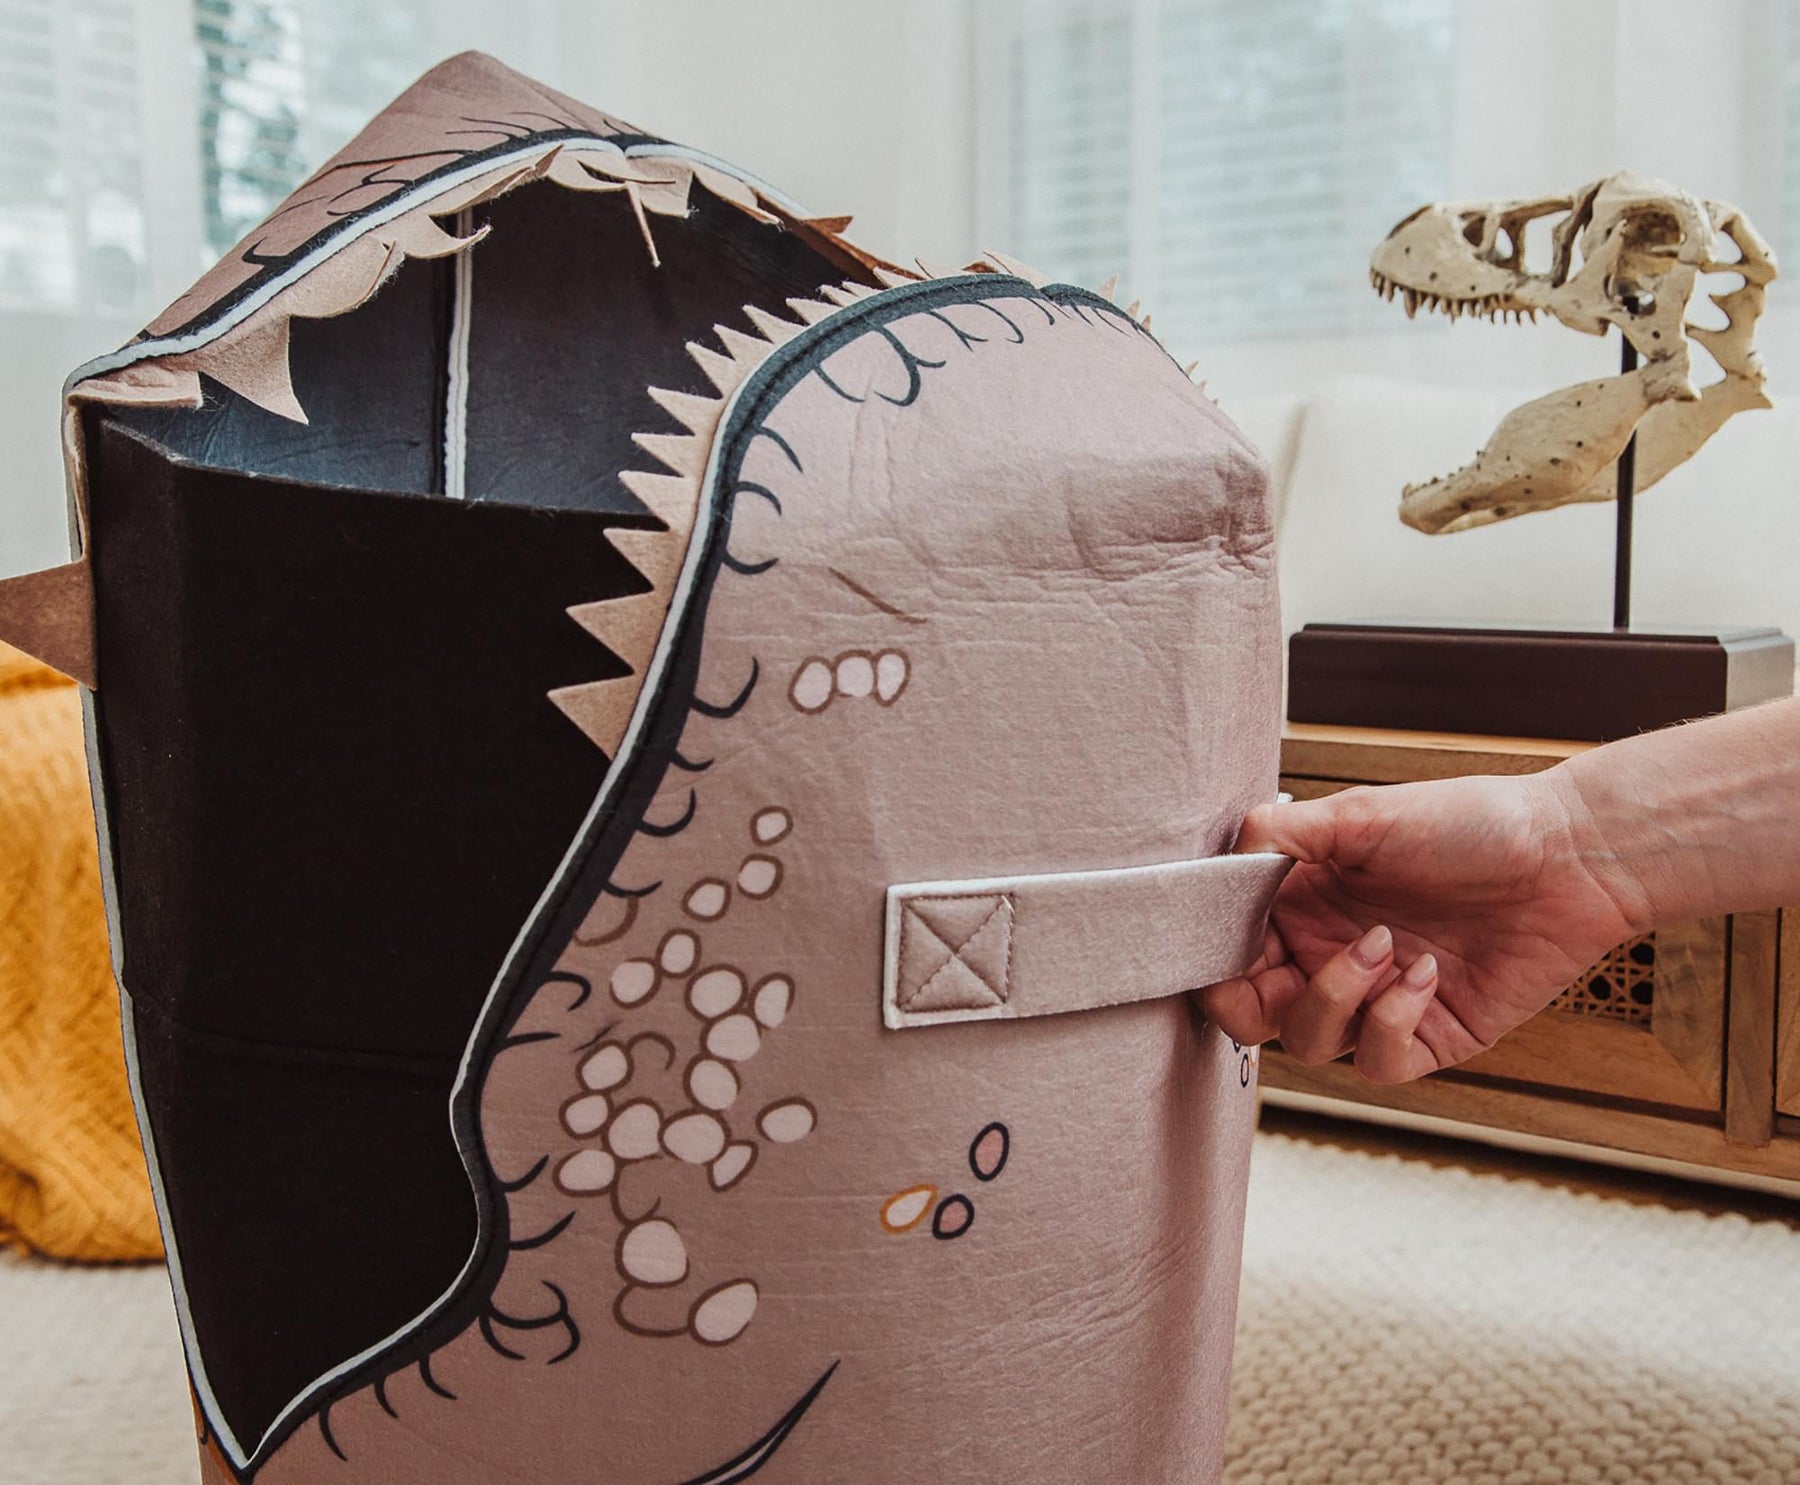 Jurassic World Open-Mouth T-Rex Laundry Clothes Hamper